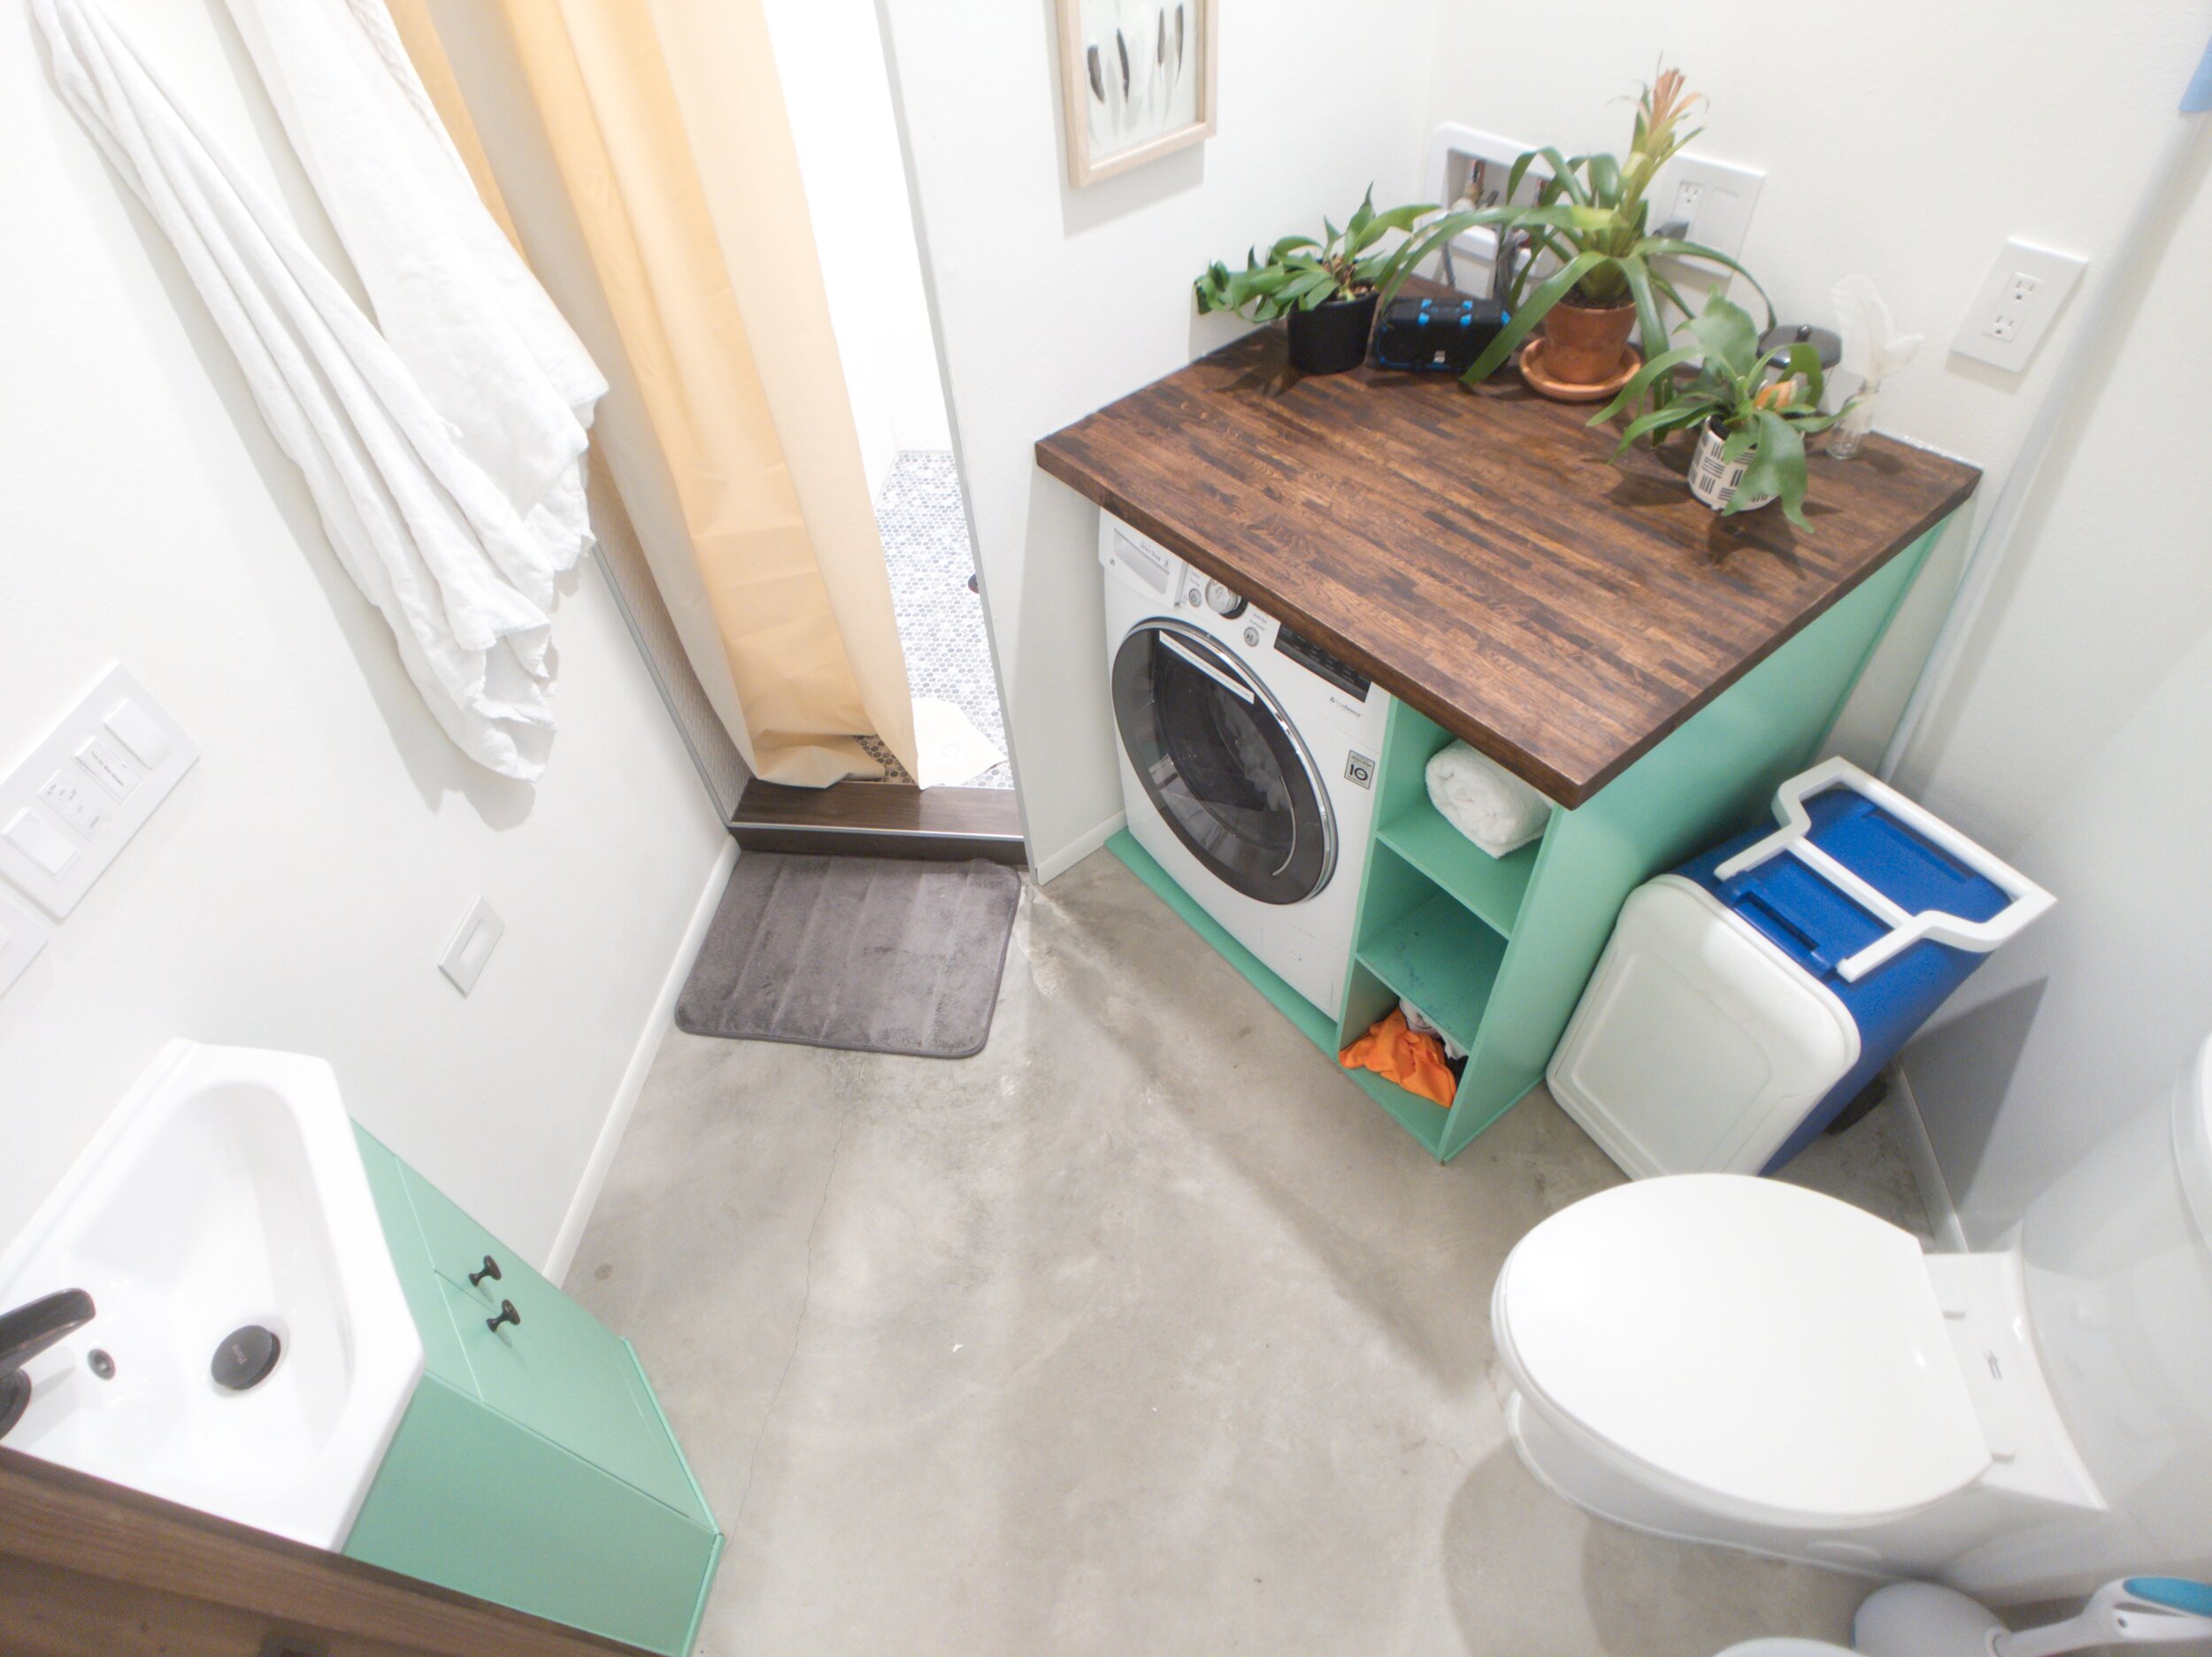 Space-Saving Ideas for Couples' Tiny House